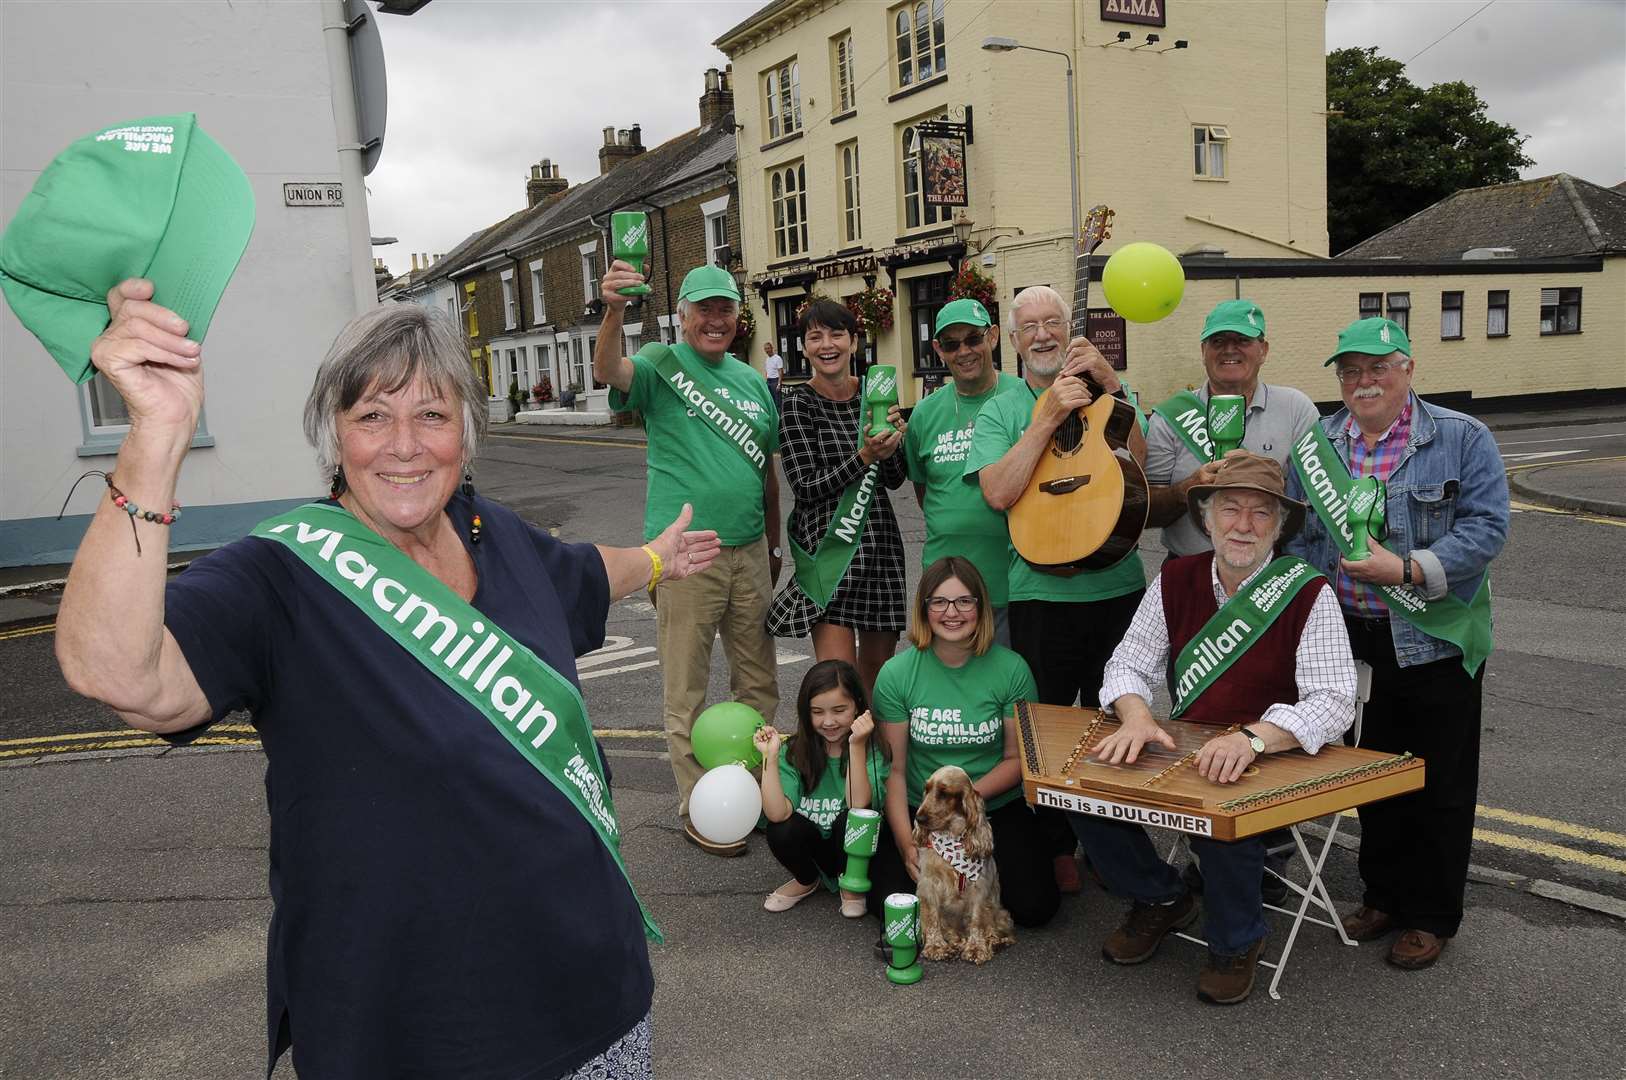 A Macmillan Coffee Morning will be held by Georgina Bishop and her helpers at the Alma Public House, West Street, Deal